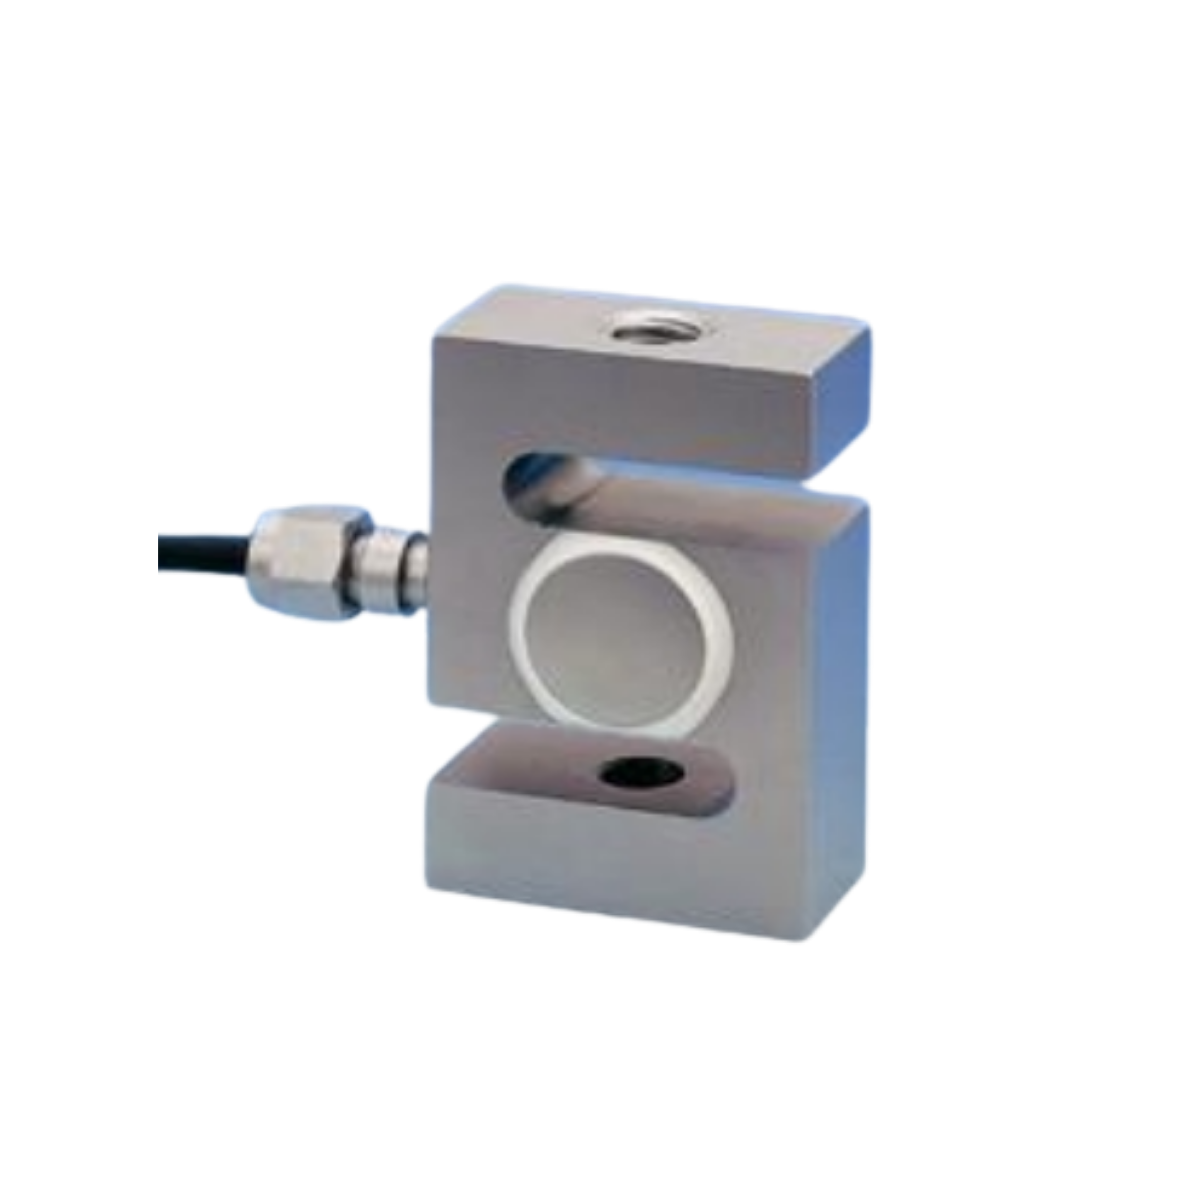 Sun Transducers STS-10K/B10 S-Beam Load Cell